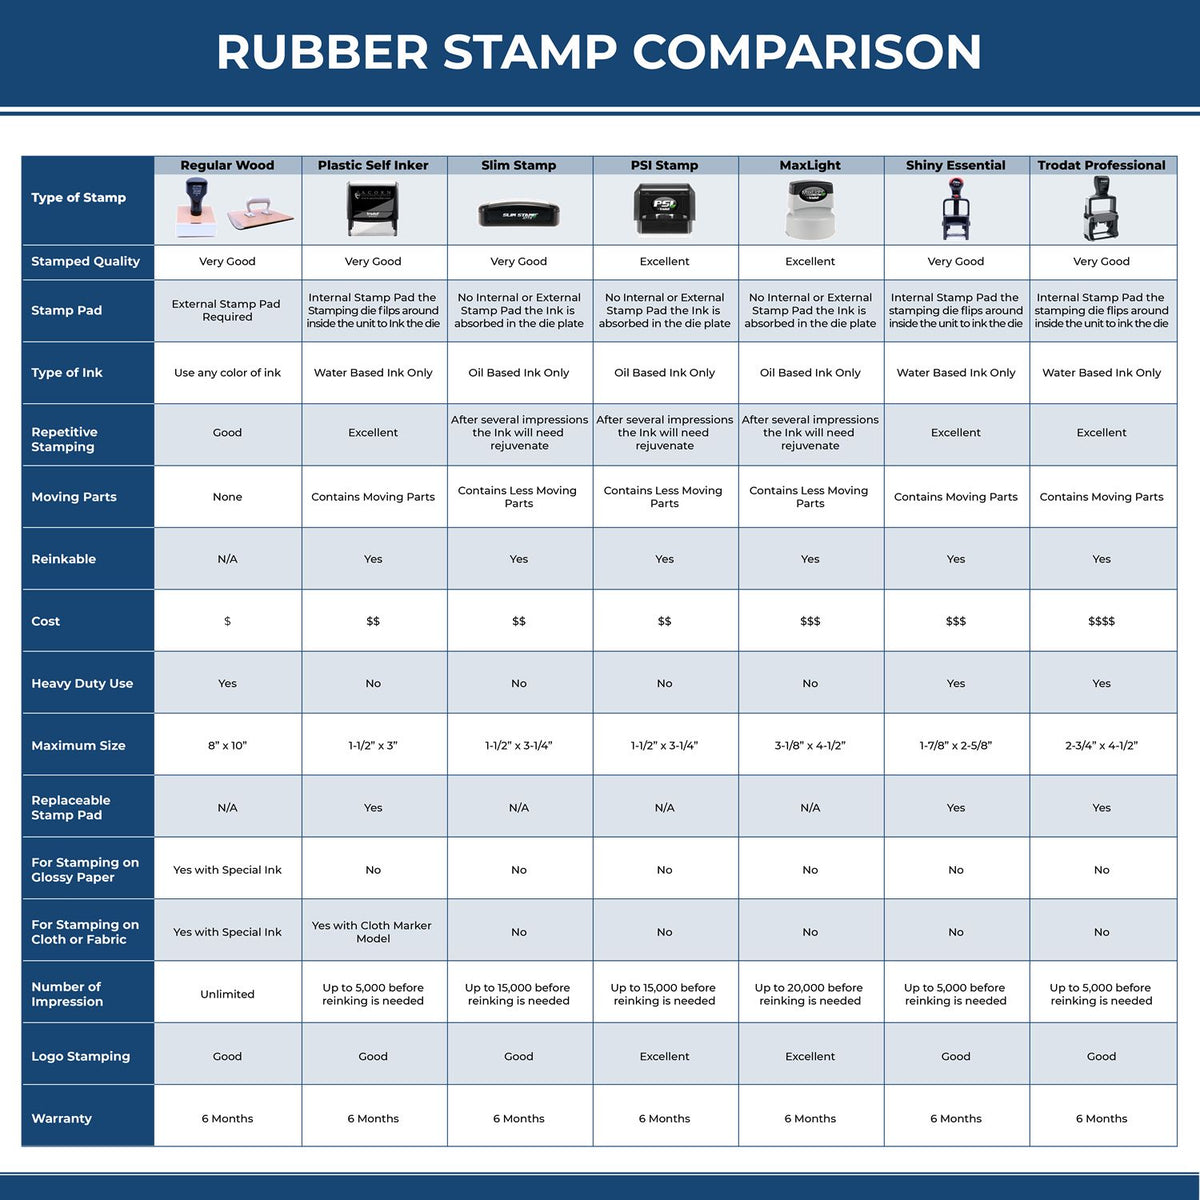 A comparison chart for the different types of mount models available for the Premium MaxLight Pre-Inked Minnesota Landscape Architectural Stamp.